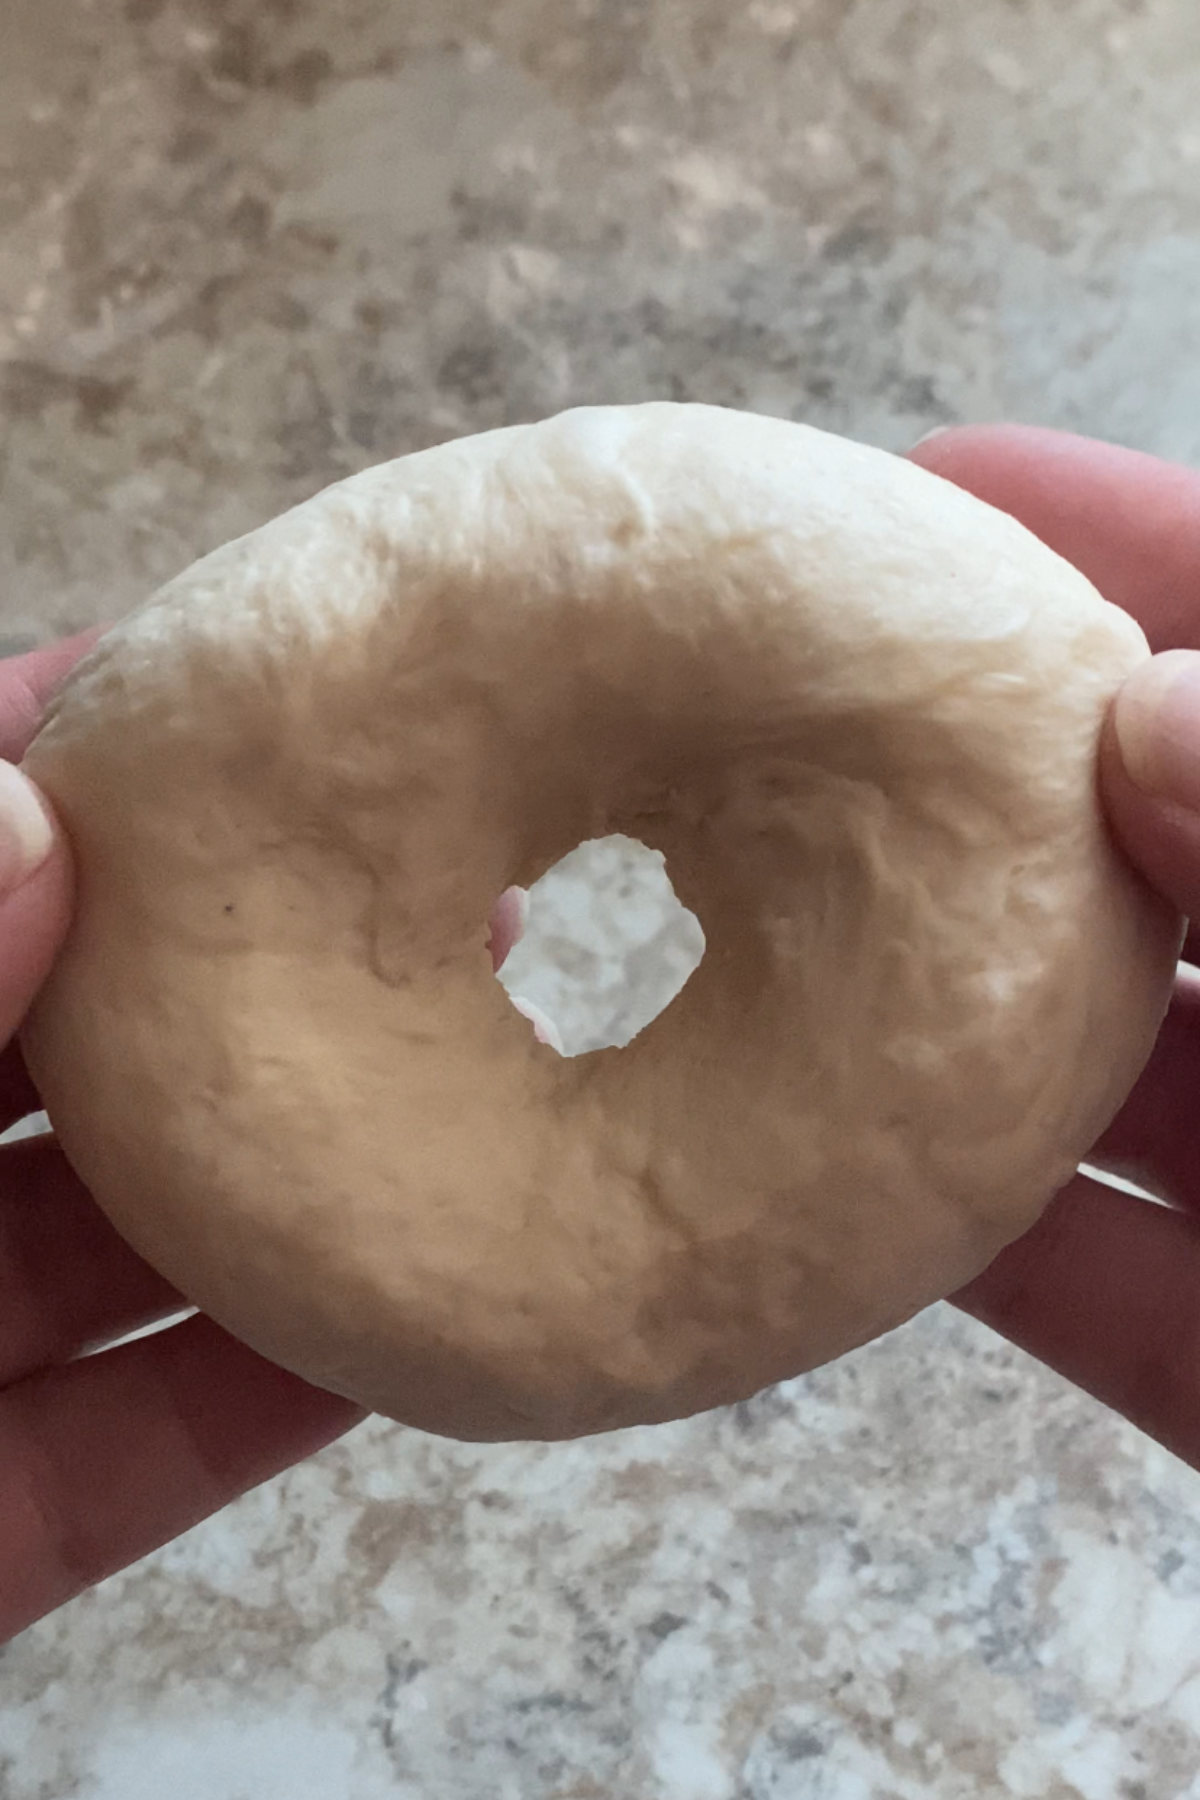 Shaping the dough into a bagel shape.